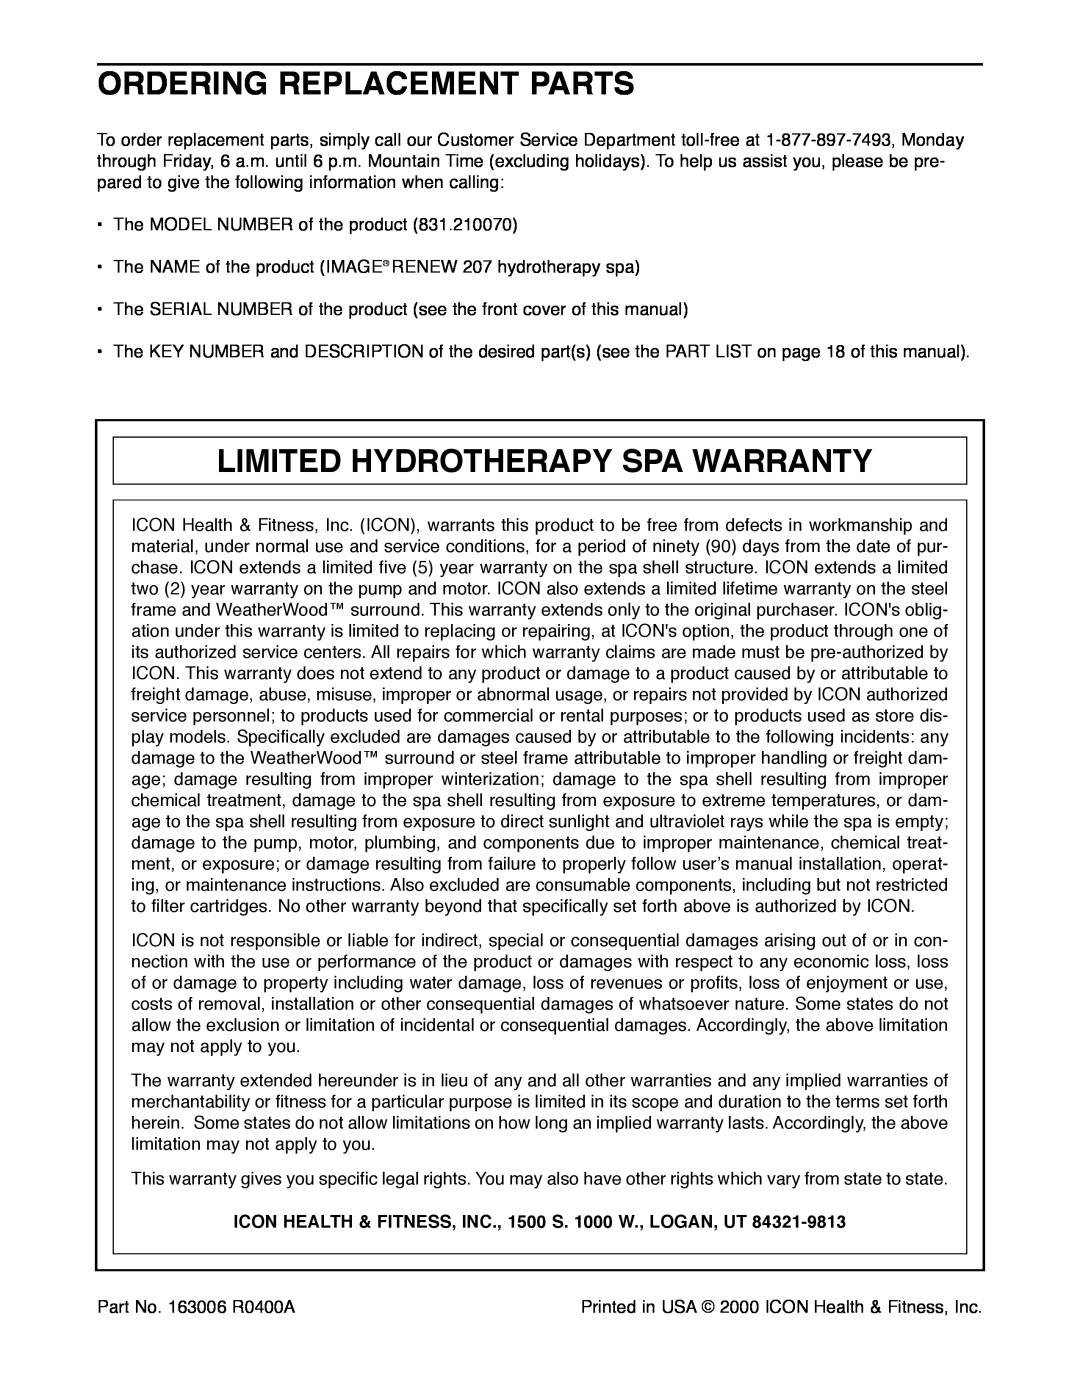 Image 831.21007 manual Ordering Replacement Parts, Limited Hydrotherapy Spa Warranty 